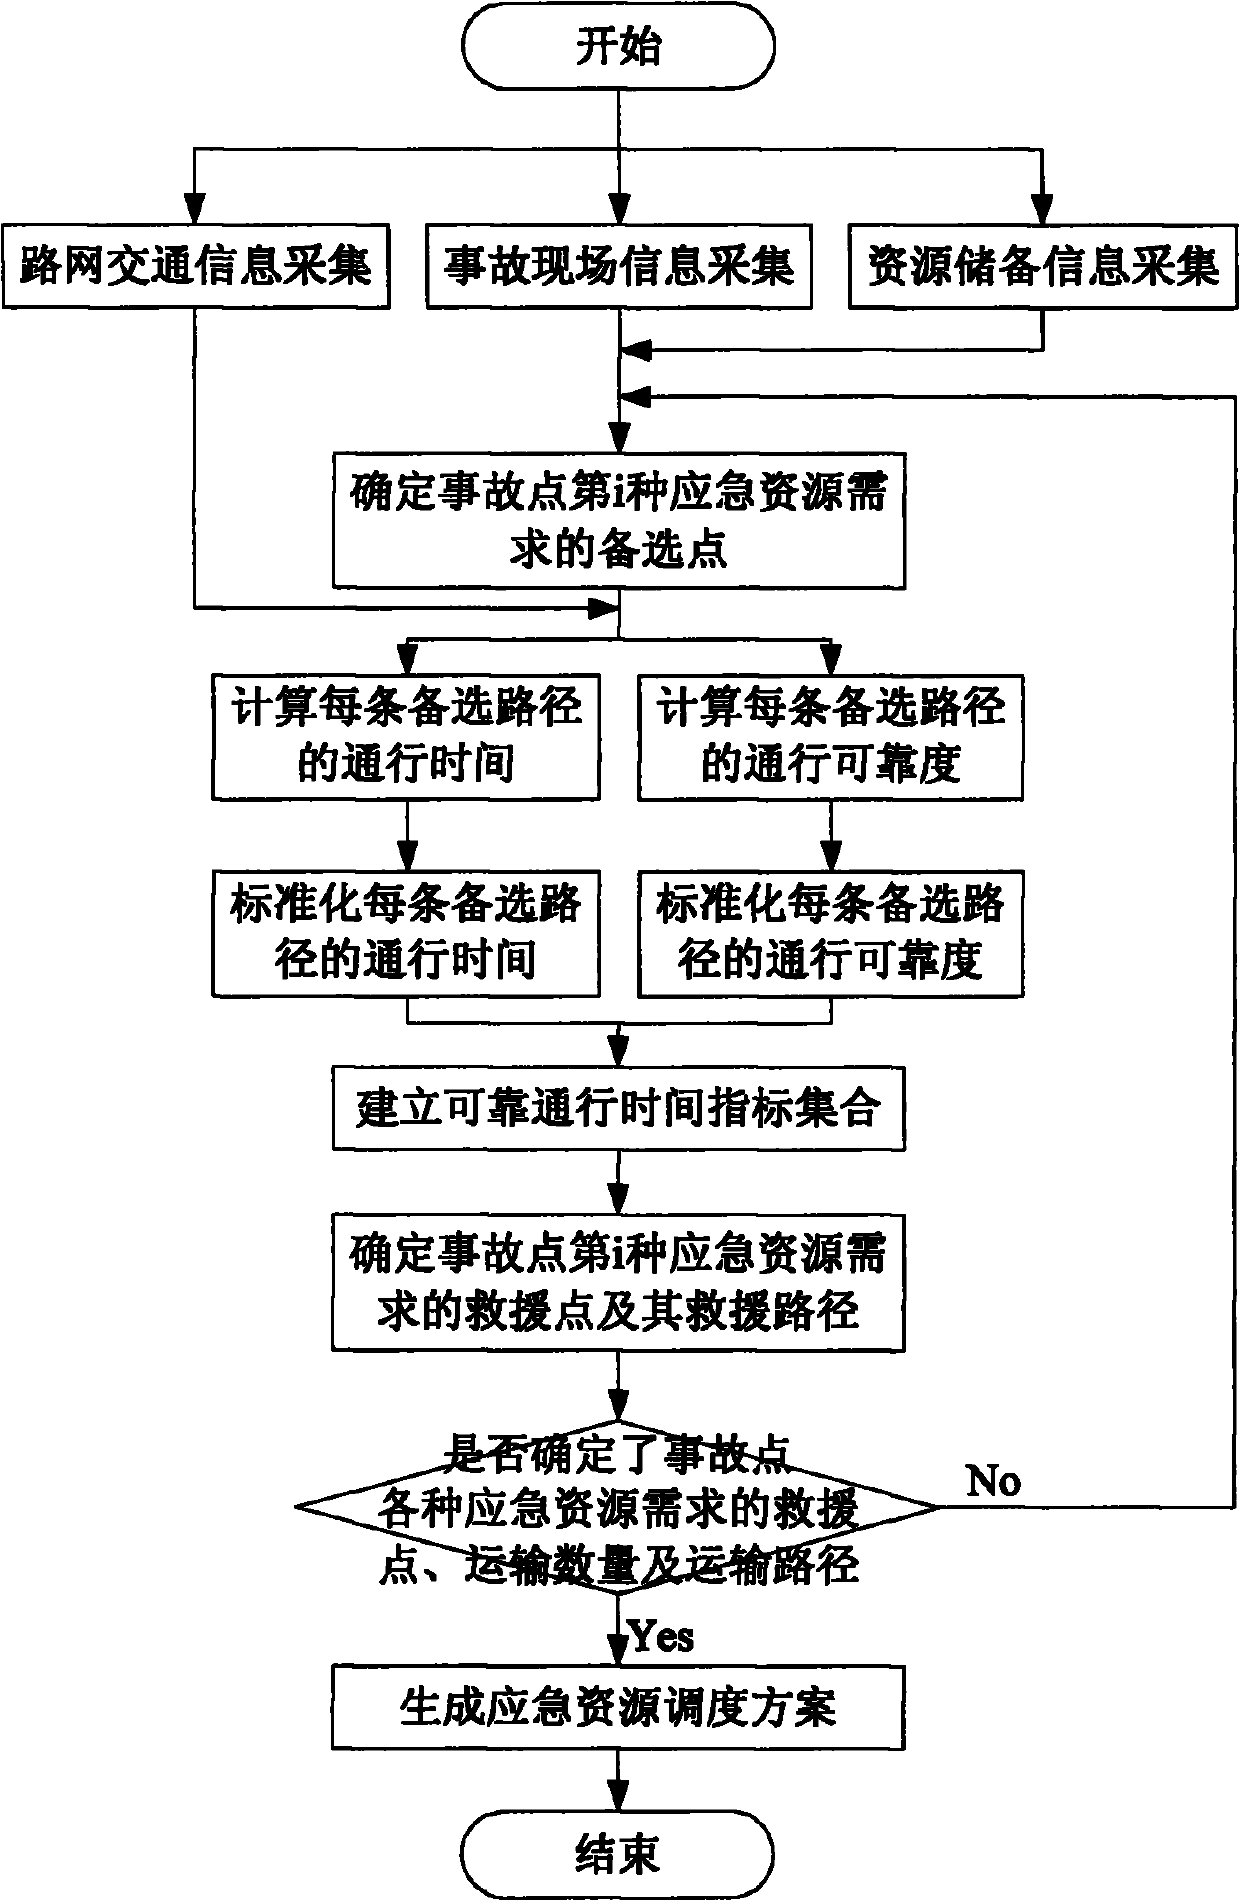 Automatic generation method of emergency resource scheduling schemes in expressway network